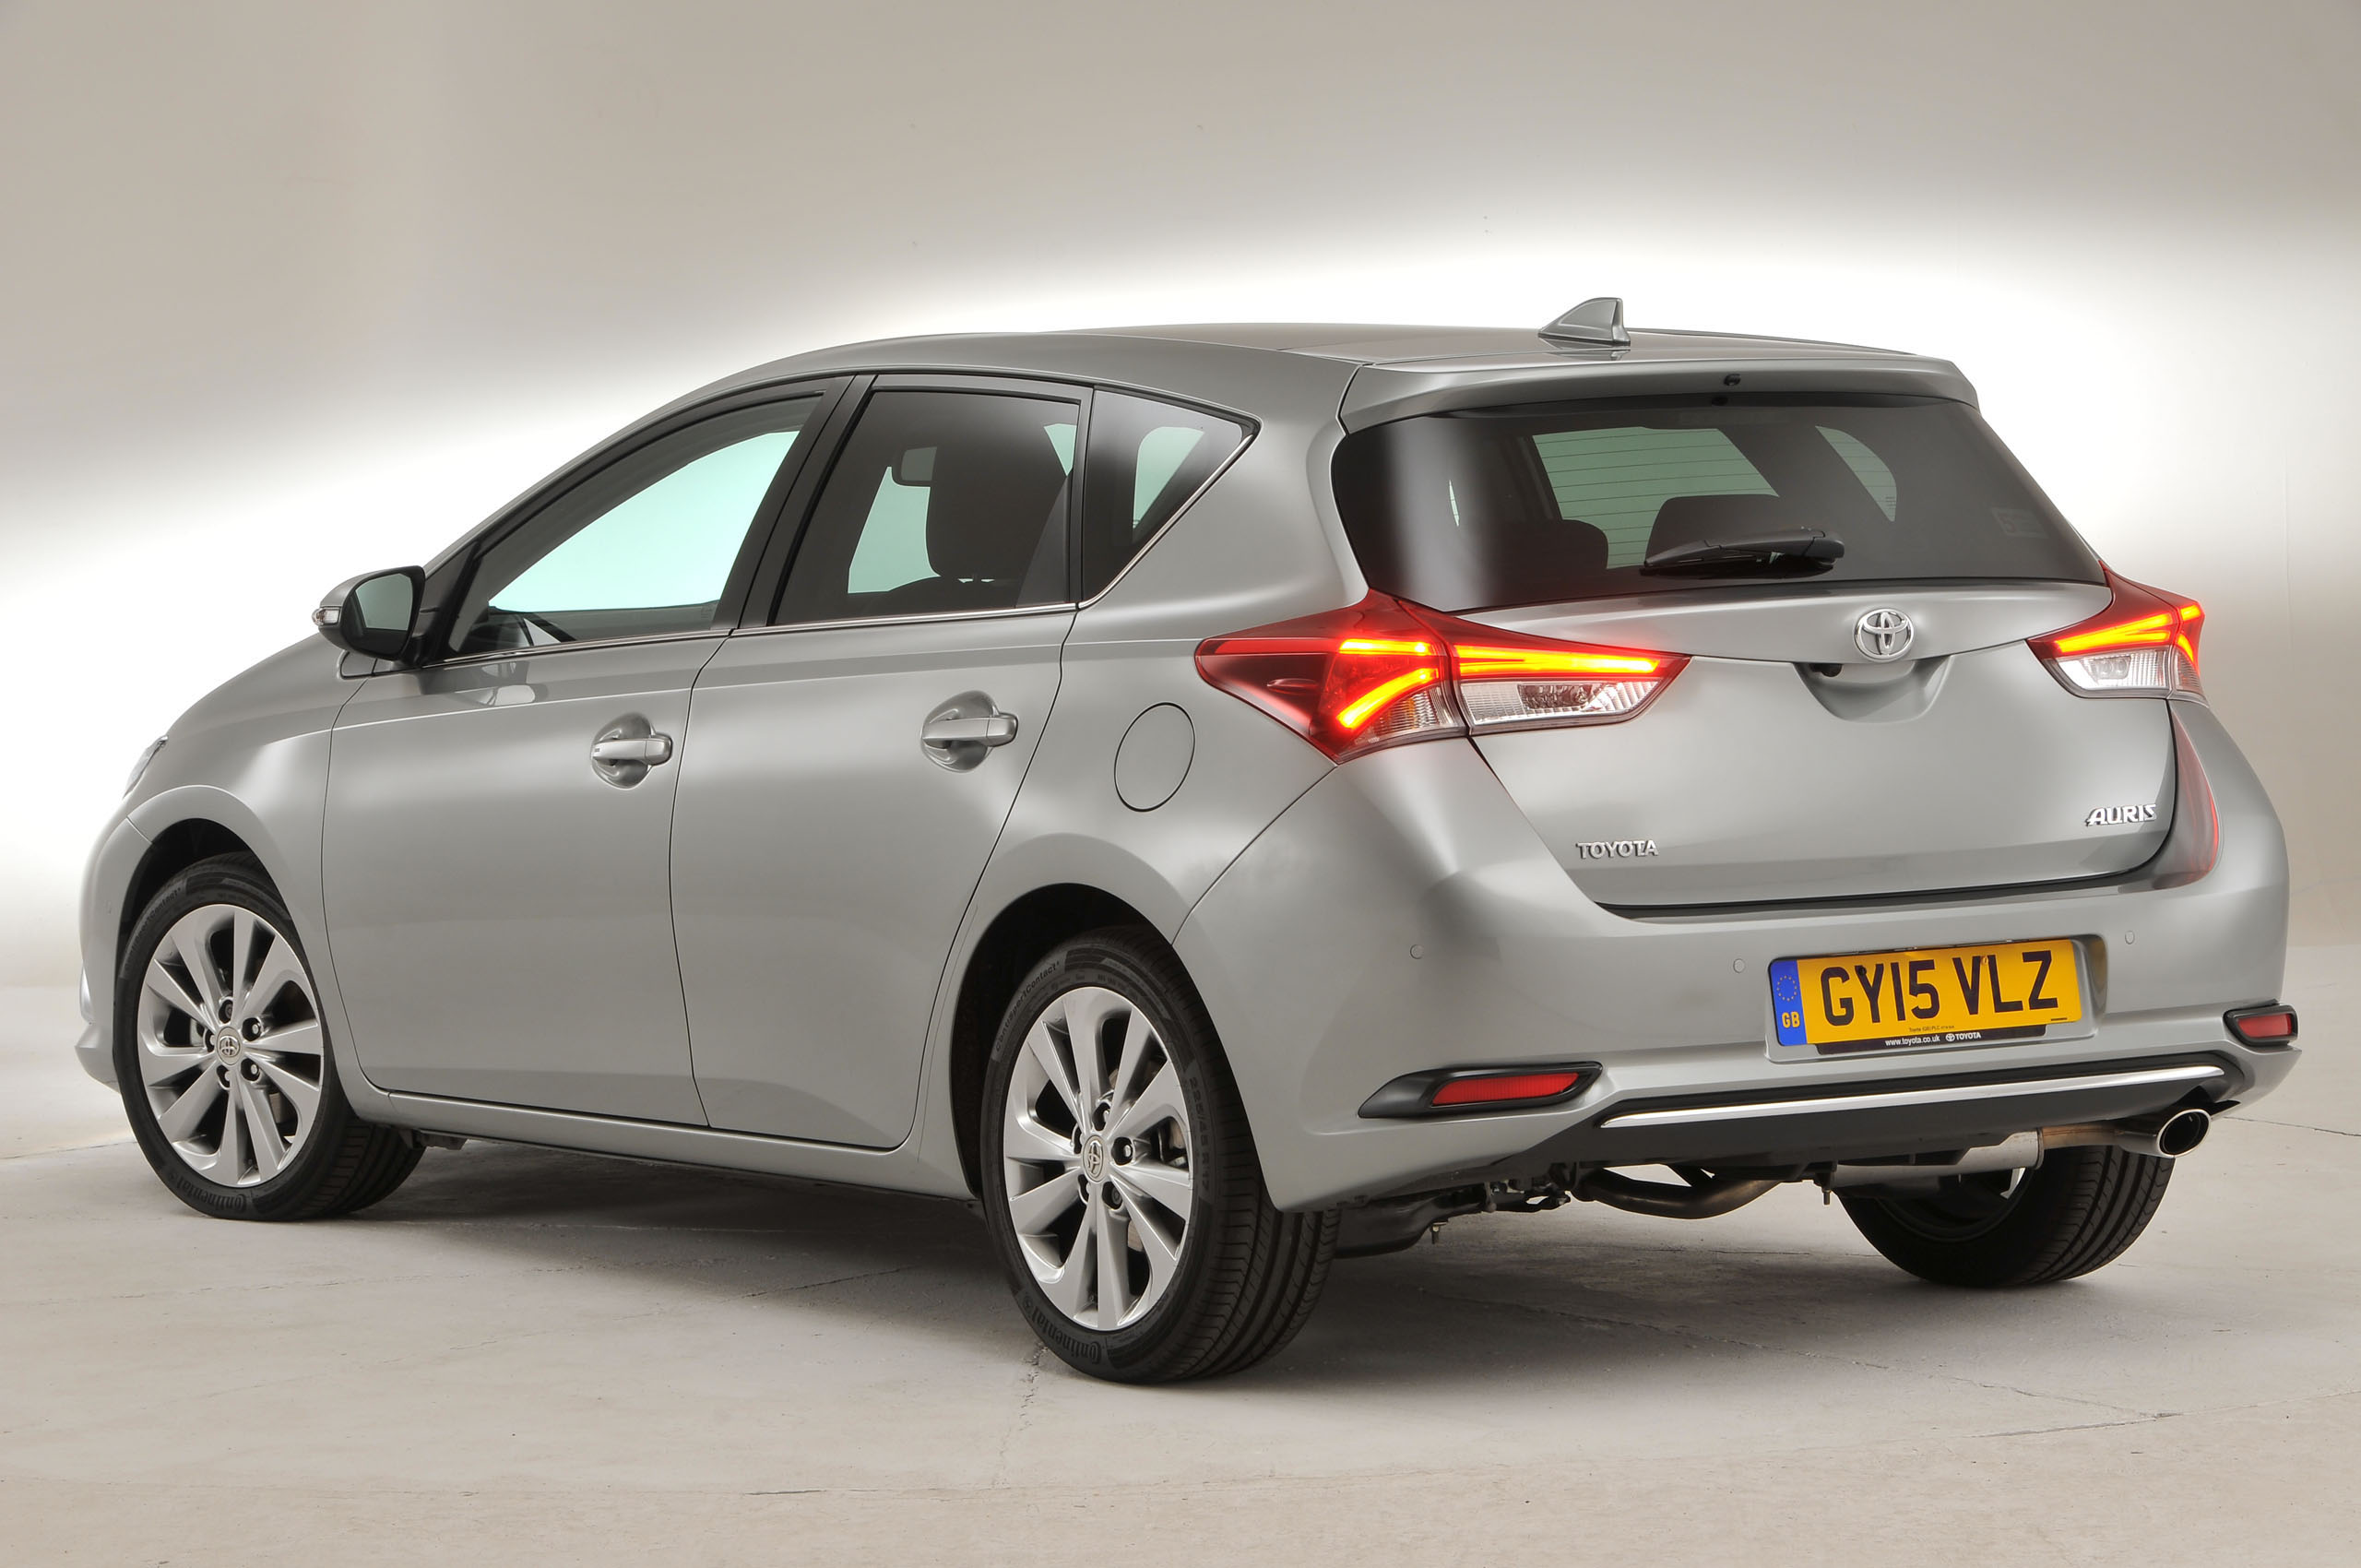 Used Toyota Auris 2012-2018 review